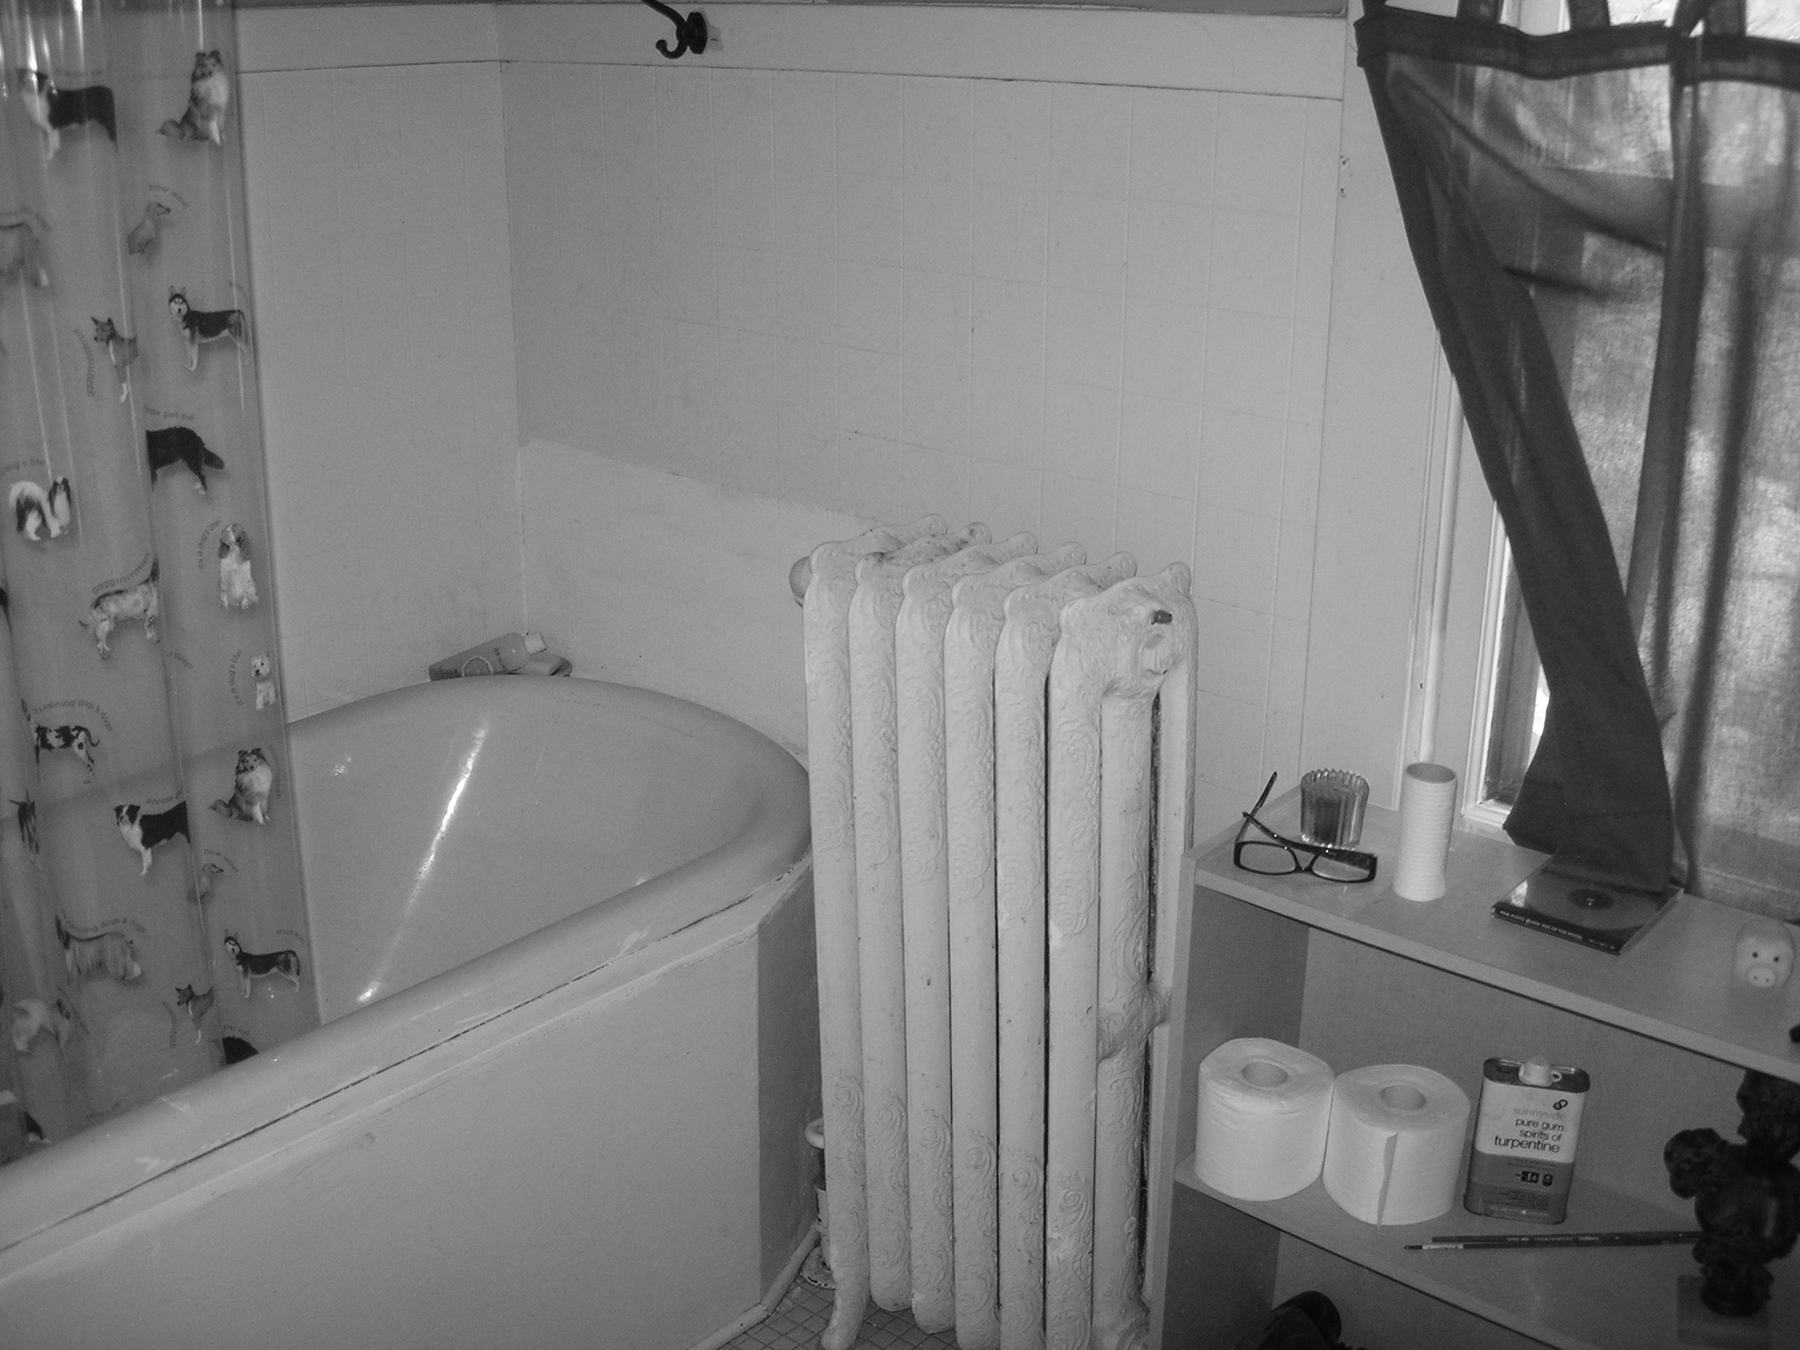 A before remodel image of a bathroom with a tub and radiator, captured in black and white